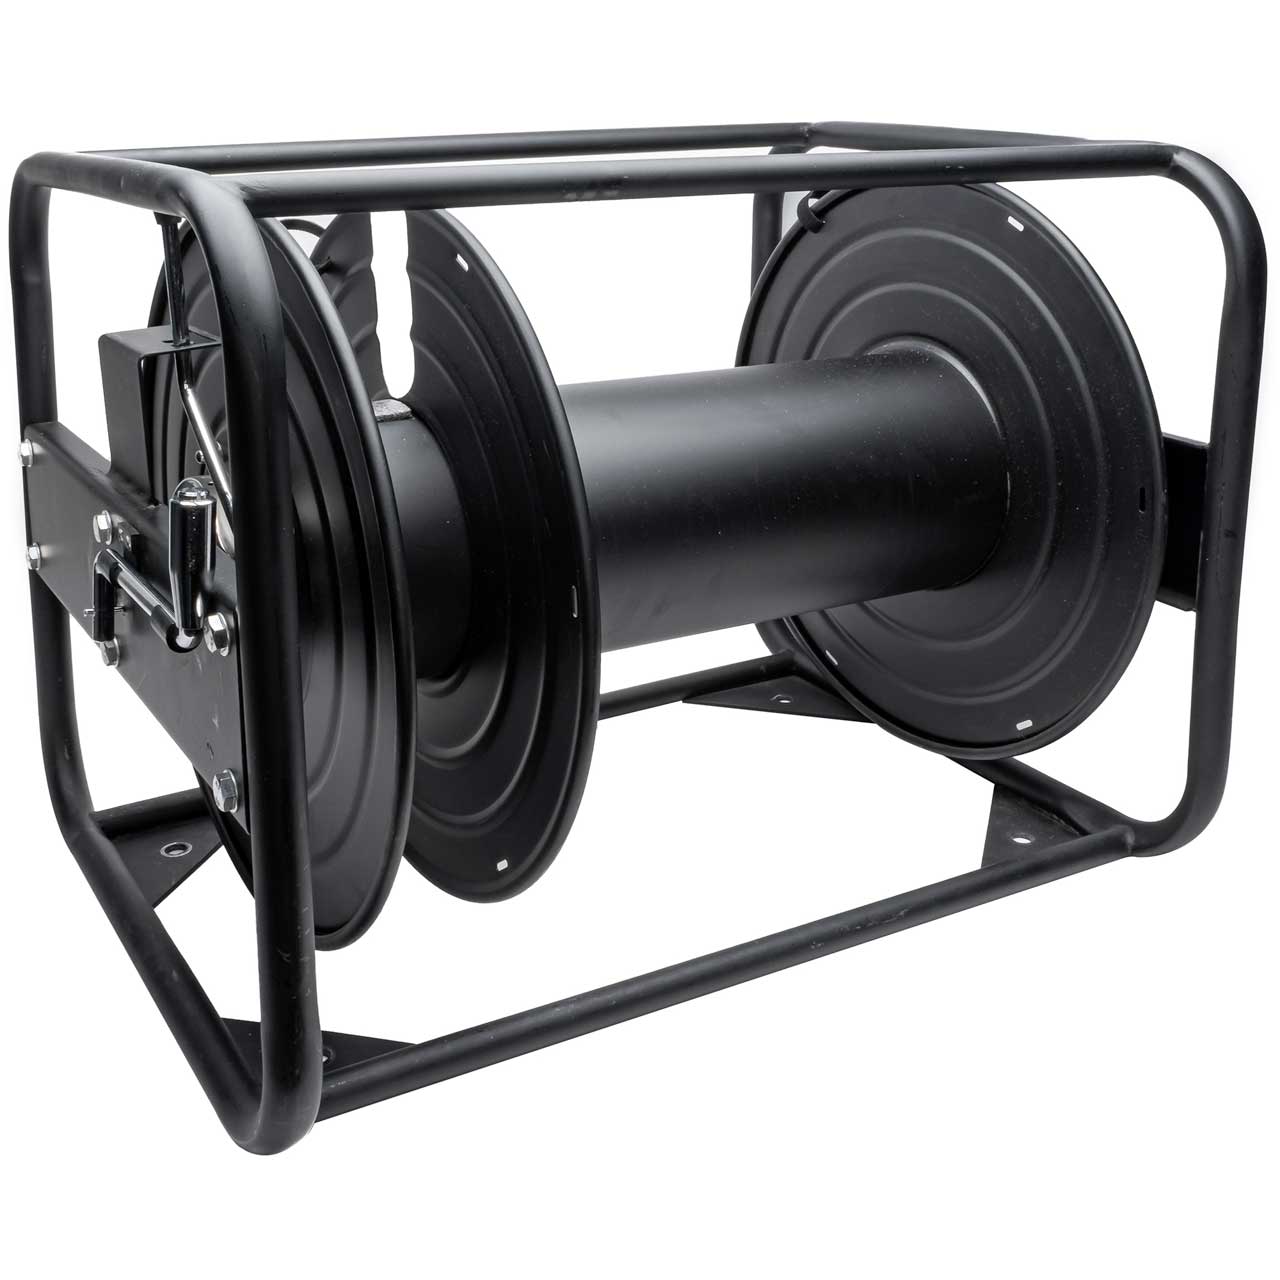 Hannay Reels Avc-16-14-16-de Cable Reel with Drum Extension